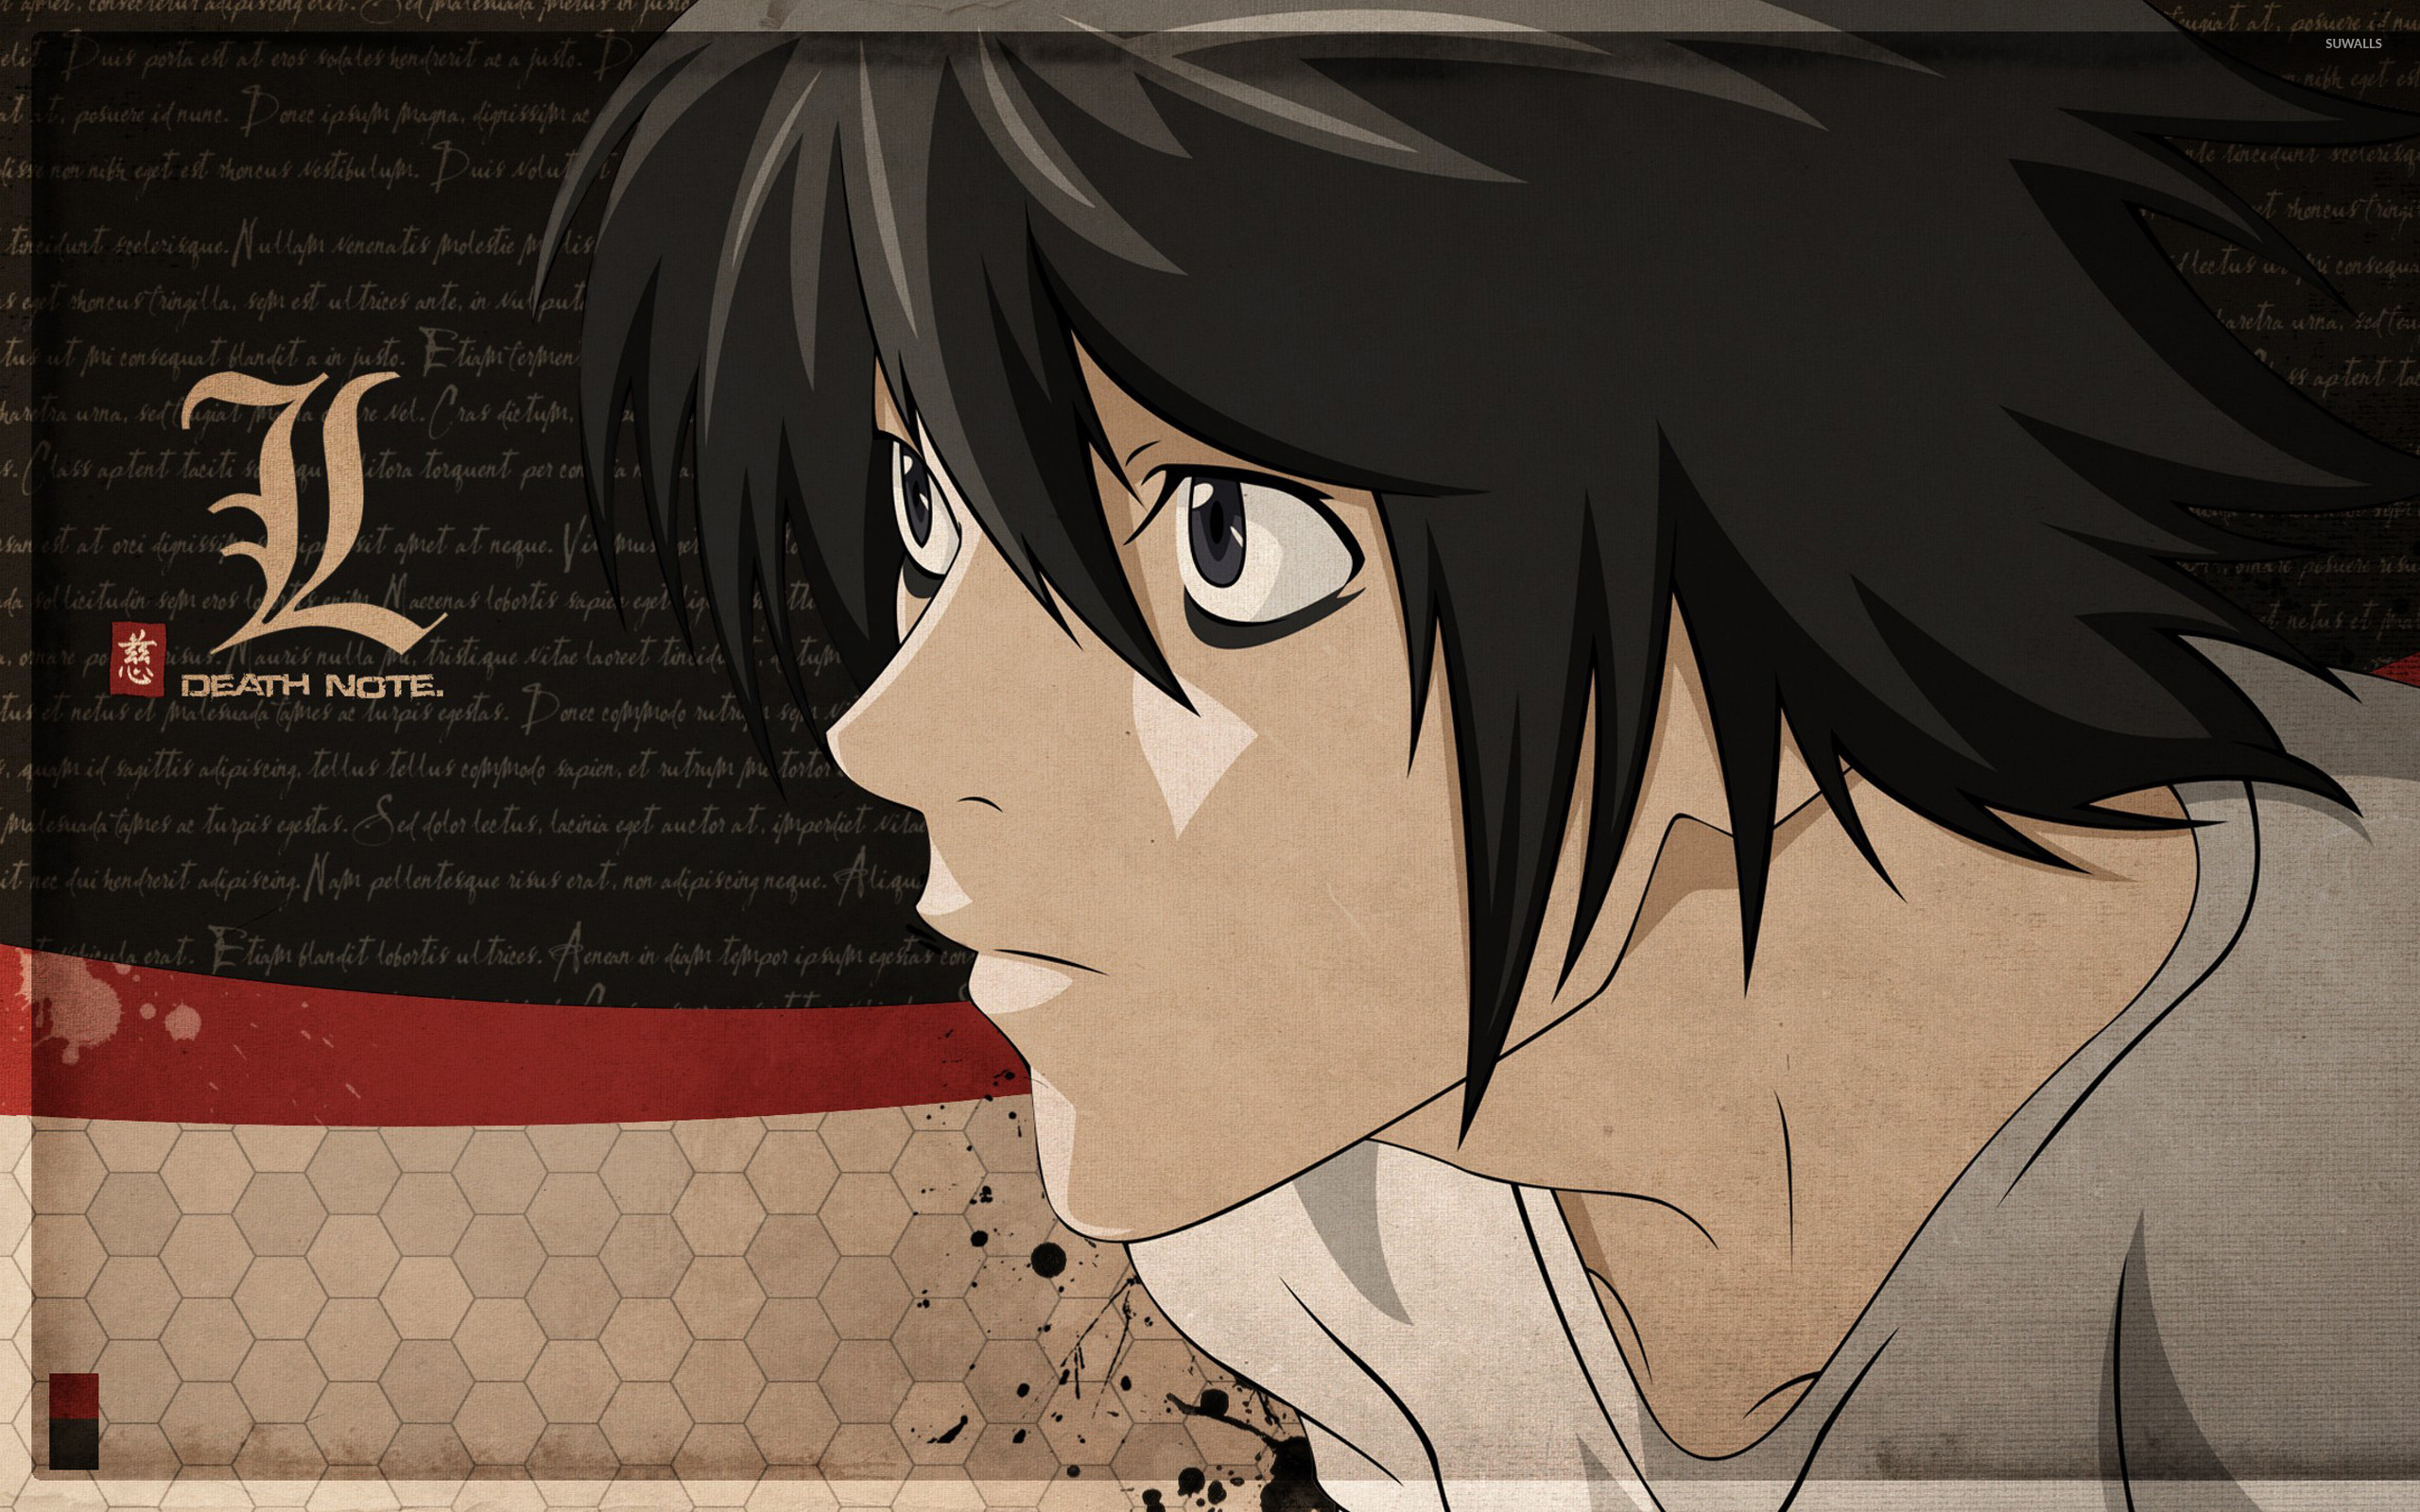 Death Note Images L Lawliet Hd Wallpaper And Background  Renders L Death  Note PNG Image  Transparent PNG Free Download on SeekPNG